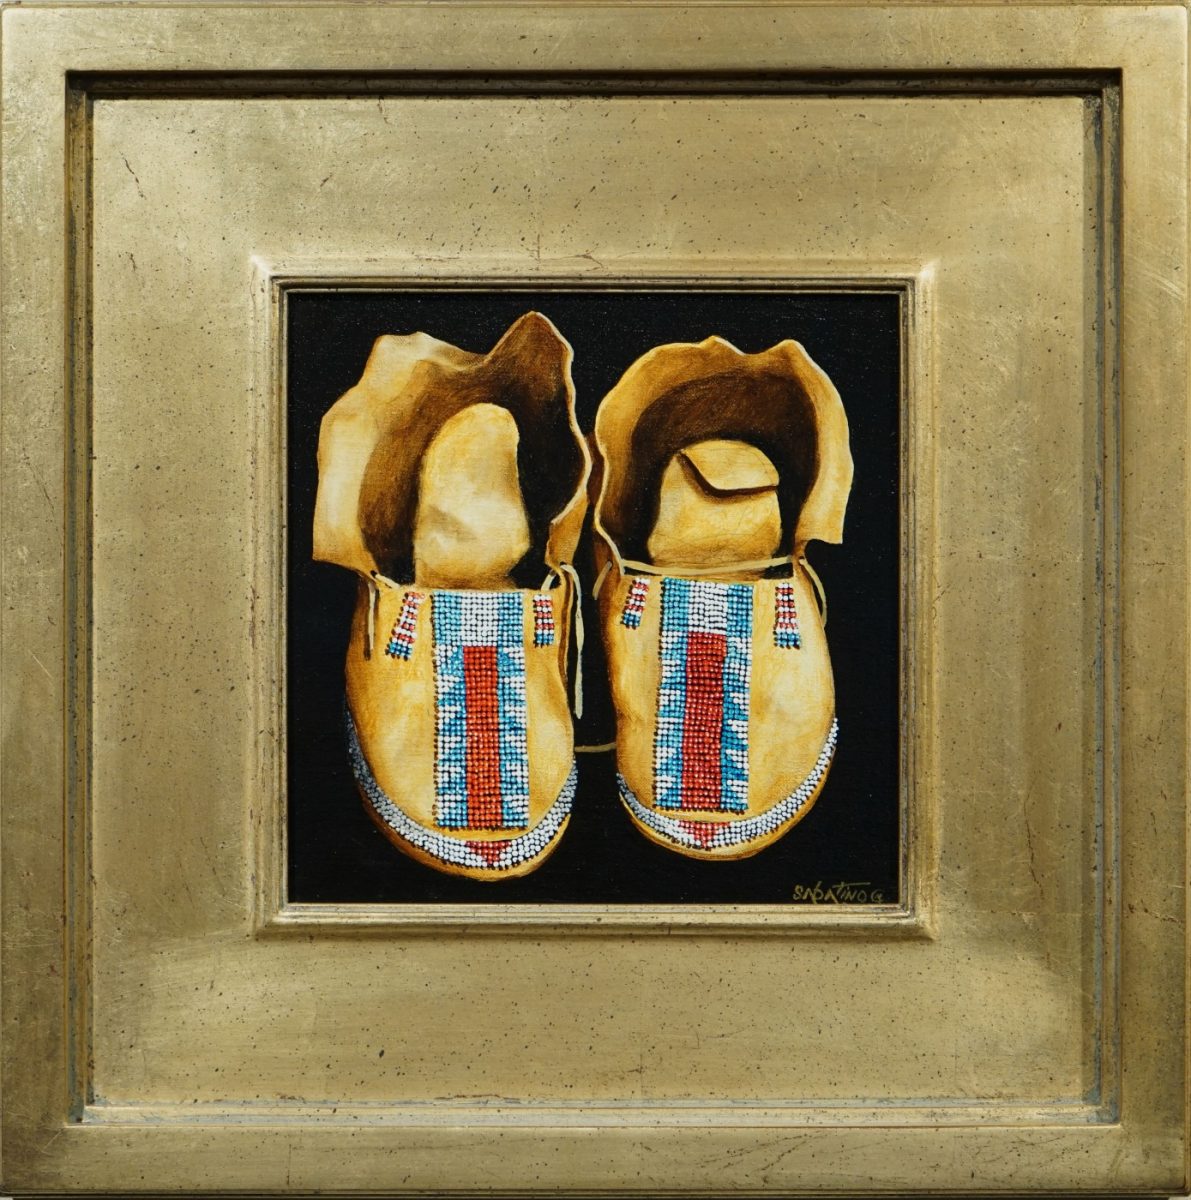 Oil painting of native American moccasins by Chuck Sabatino